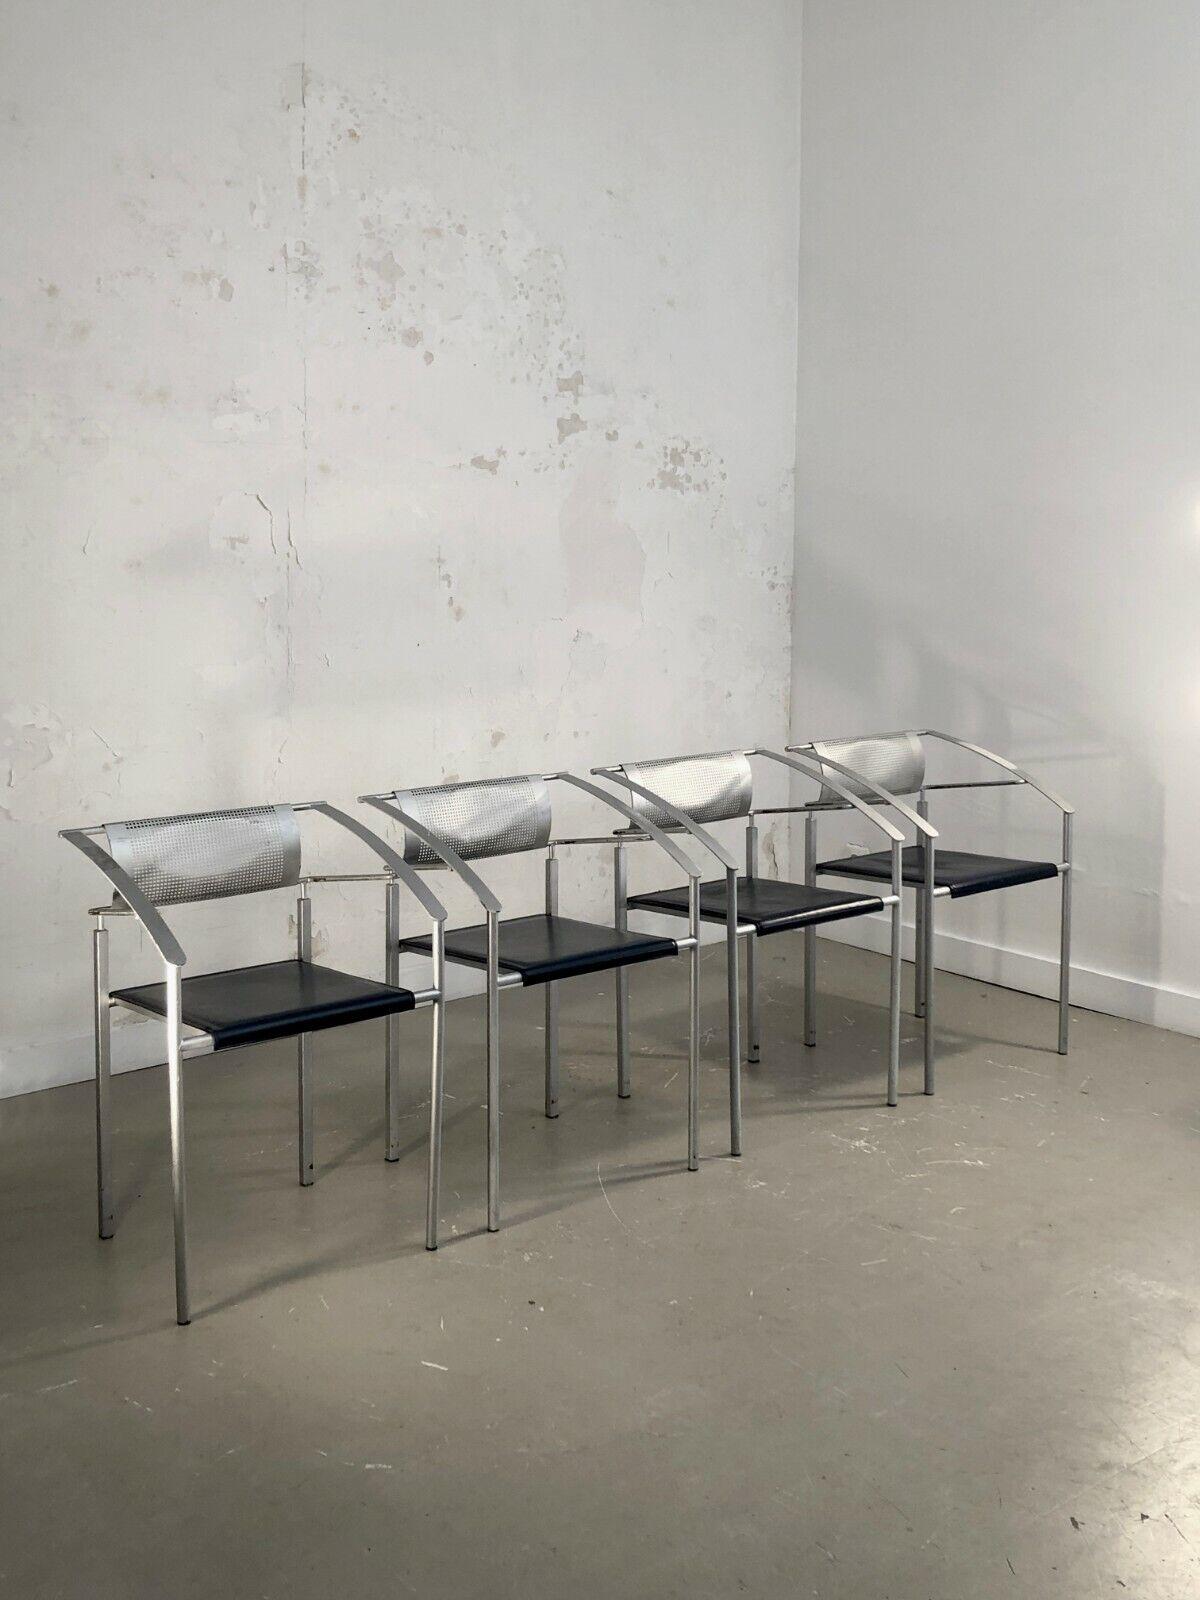 A set of 4 stackable chairs, Post-Modernist, Constructivist, Memphis, complex geometric structures in metallic gray square section metal, seats in dark blue leather, backrest and perforated metal, Fly-Line edition, Italy 1980-1990.

DIMENSIONS: H 75